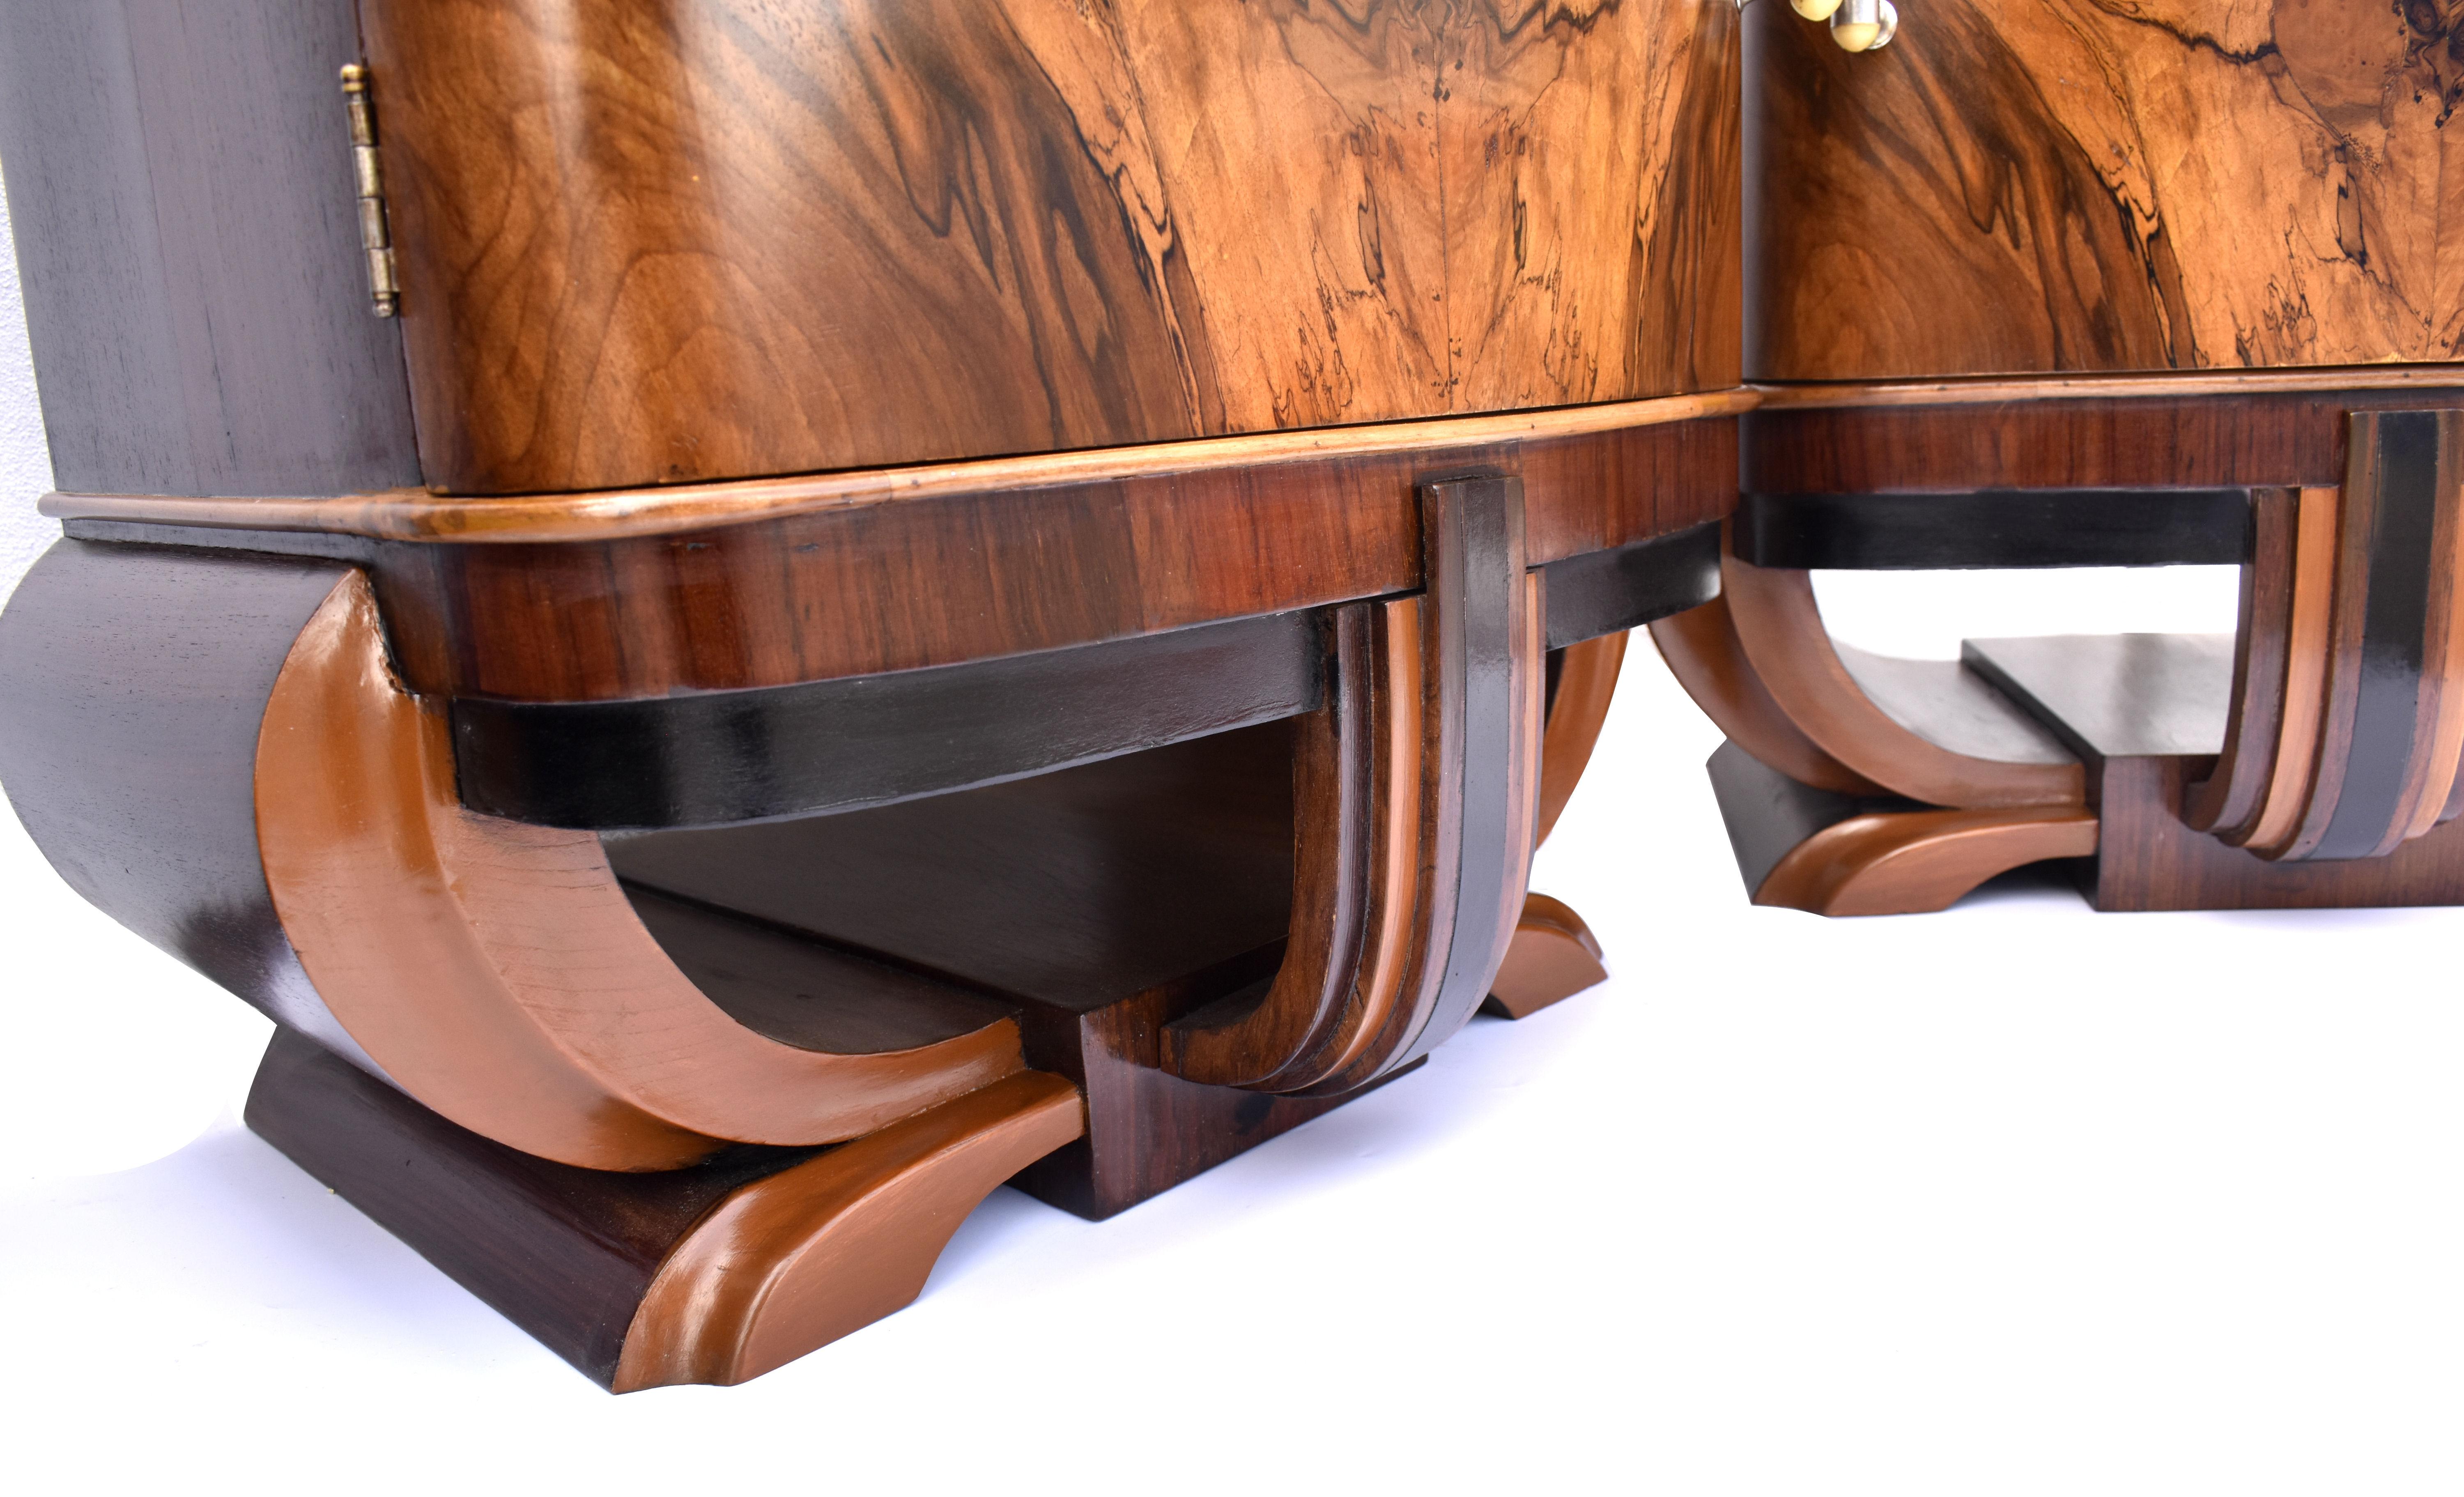 20th Century Art Deco Italian Pair of Matching Bedside Table Cabinets Night Stands, c1930